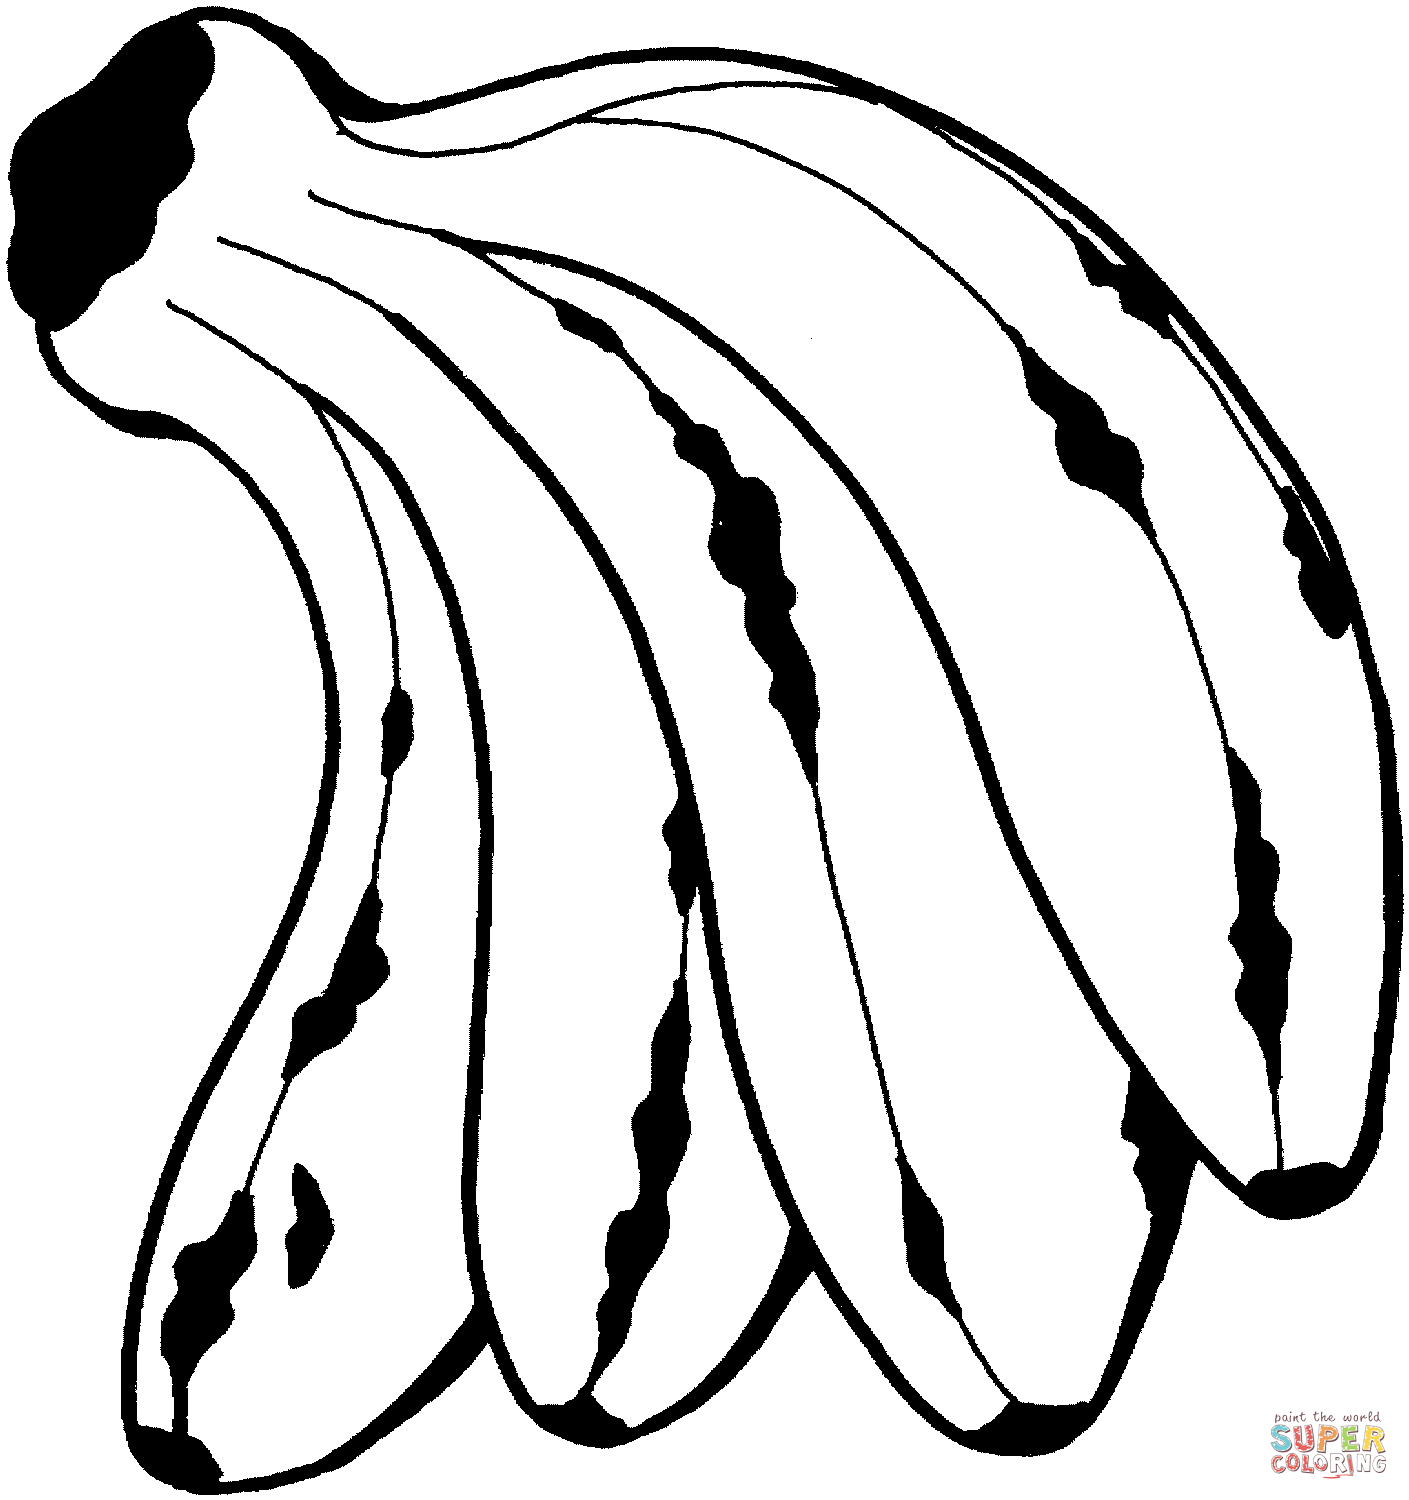 Bunch of bananas coloring page | Free Printable Coloring Pages